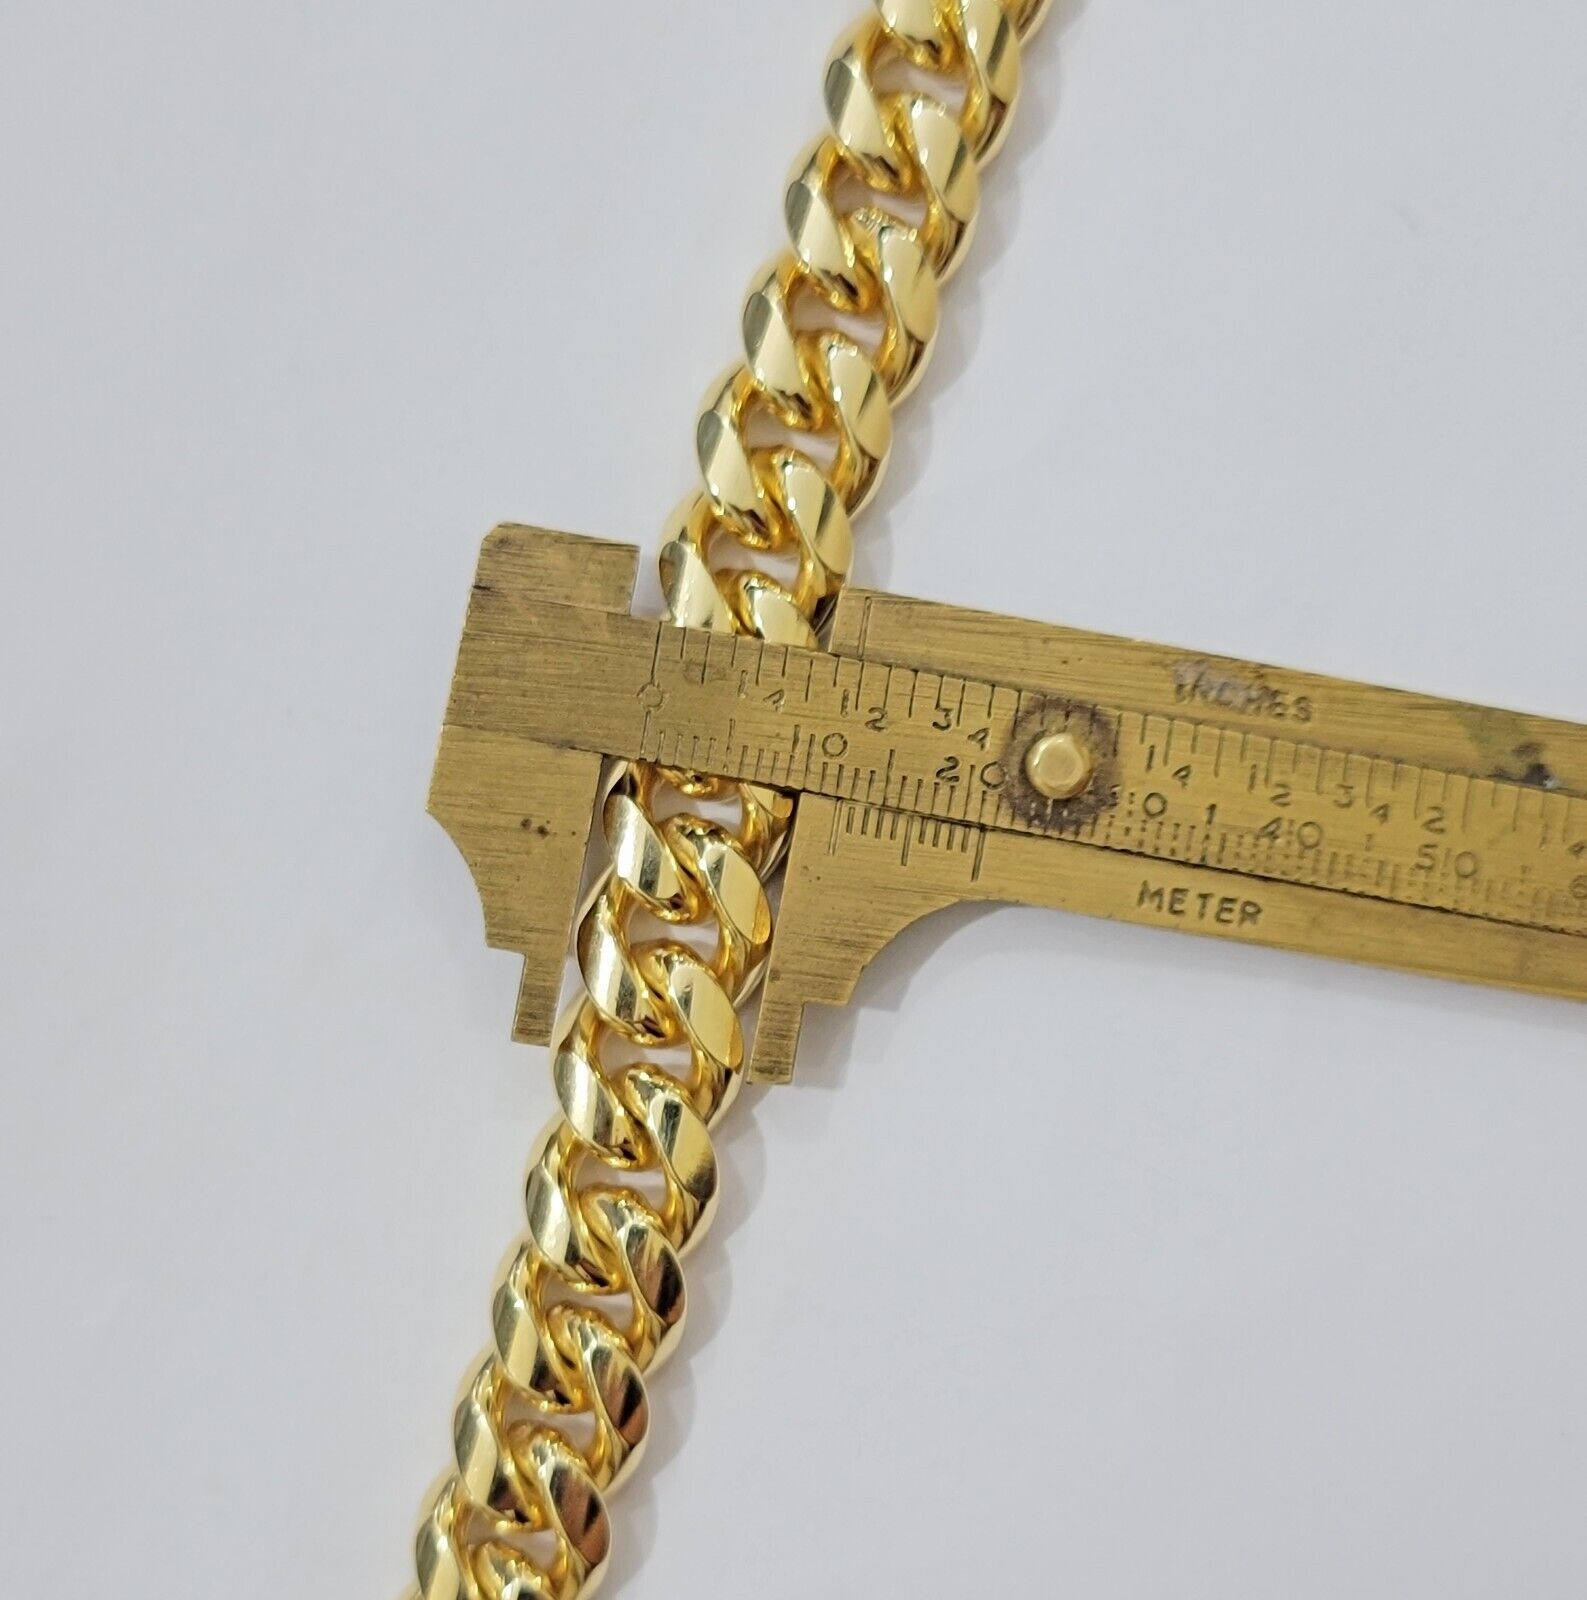 Solid 10k Gold Bracelet 12mm Miami Cuban Link 9" Inch Box Clasp SOLID LINK, Mens